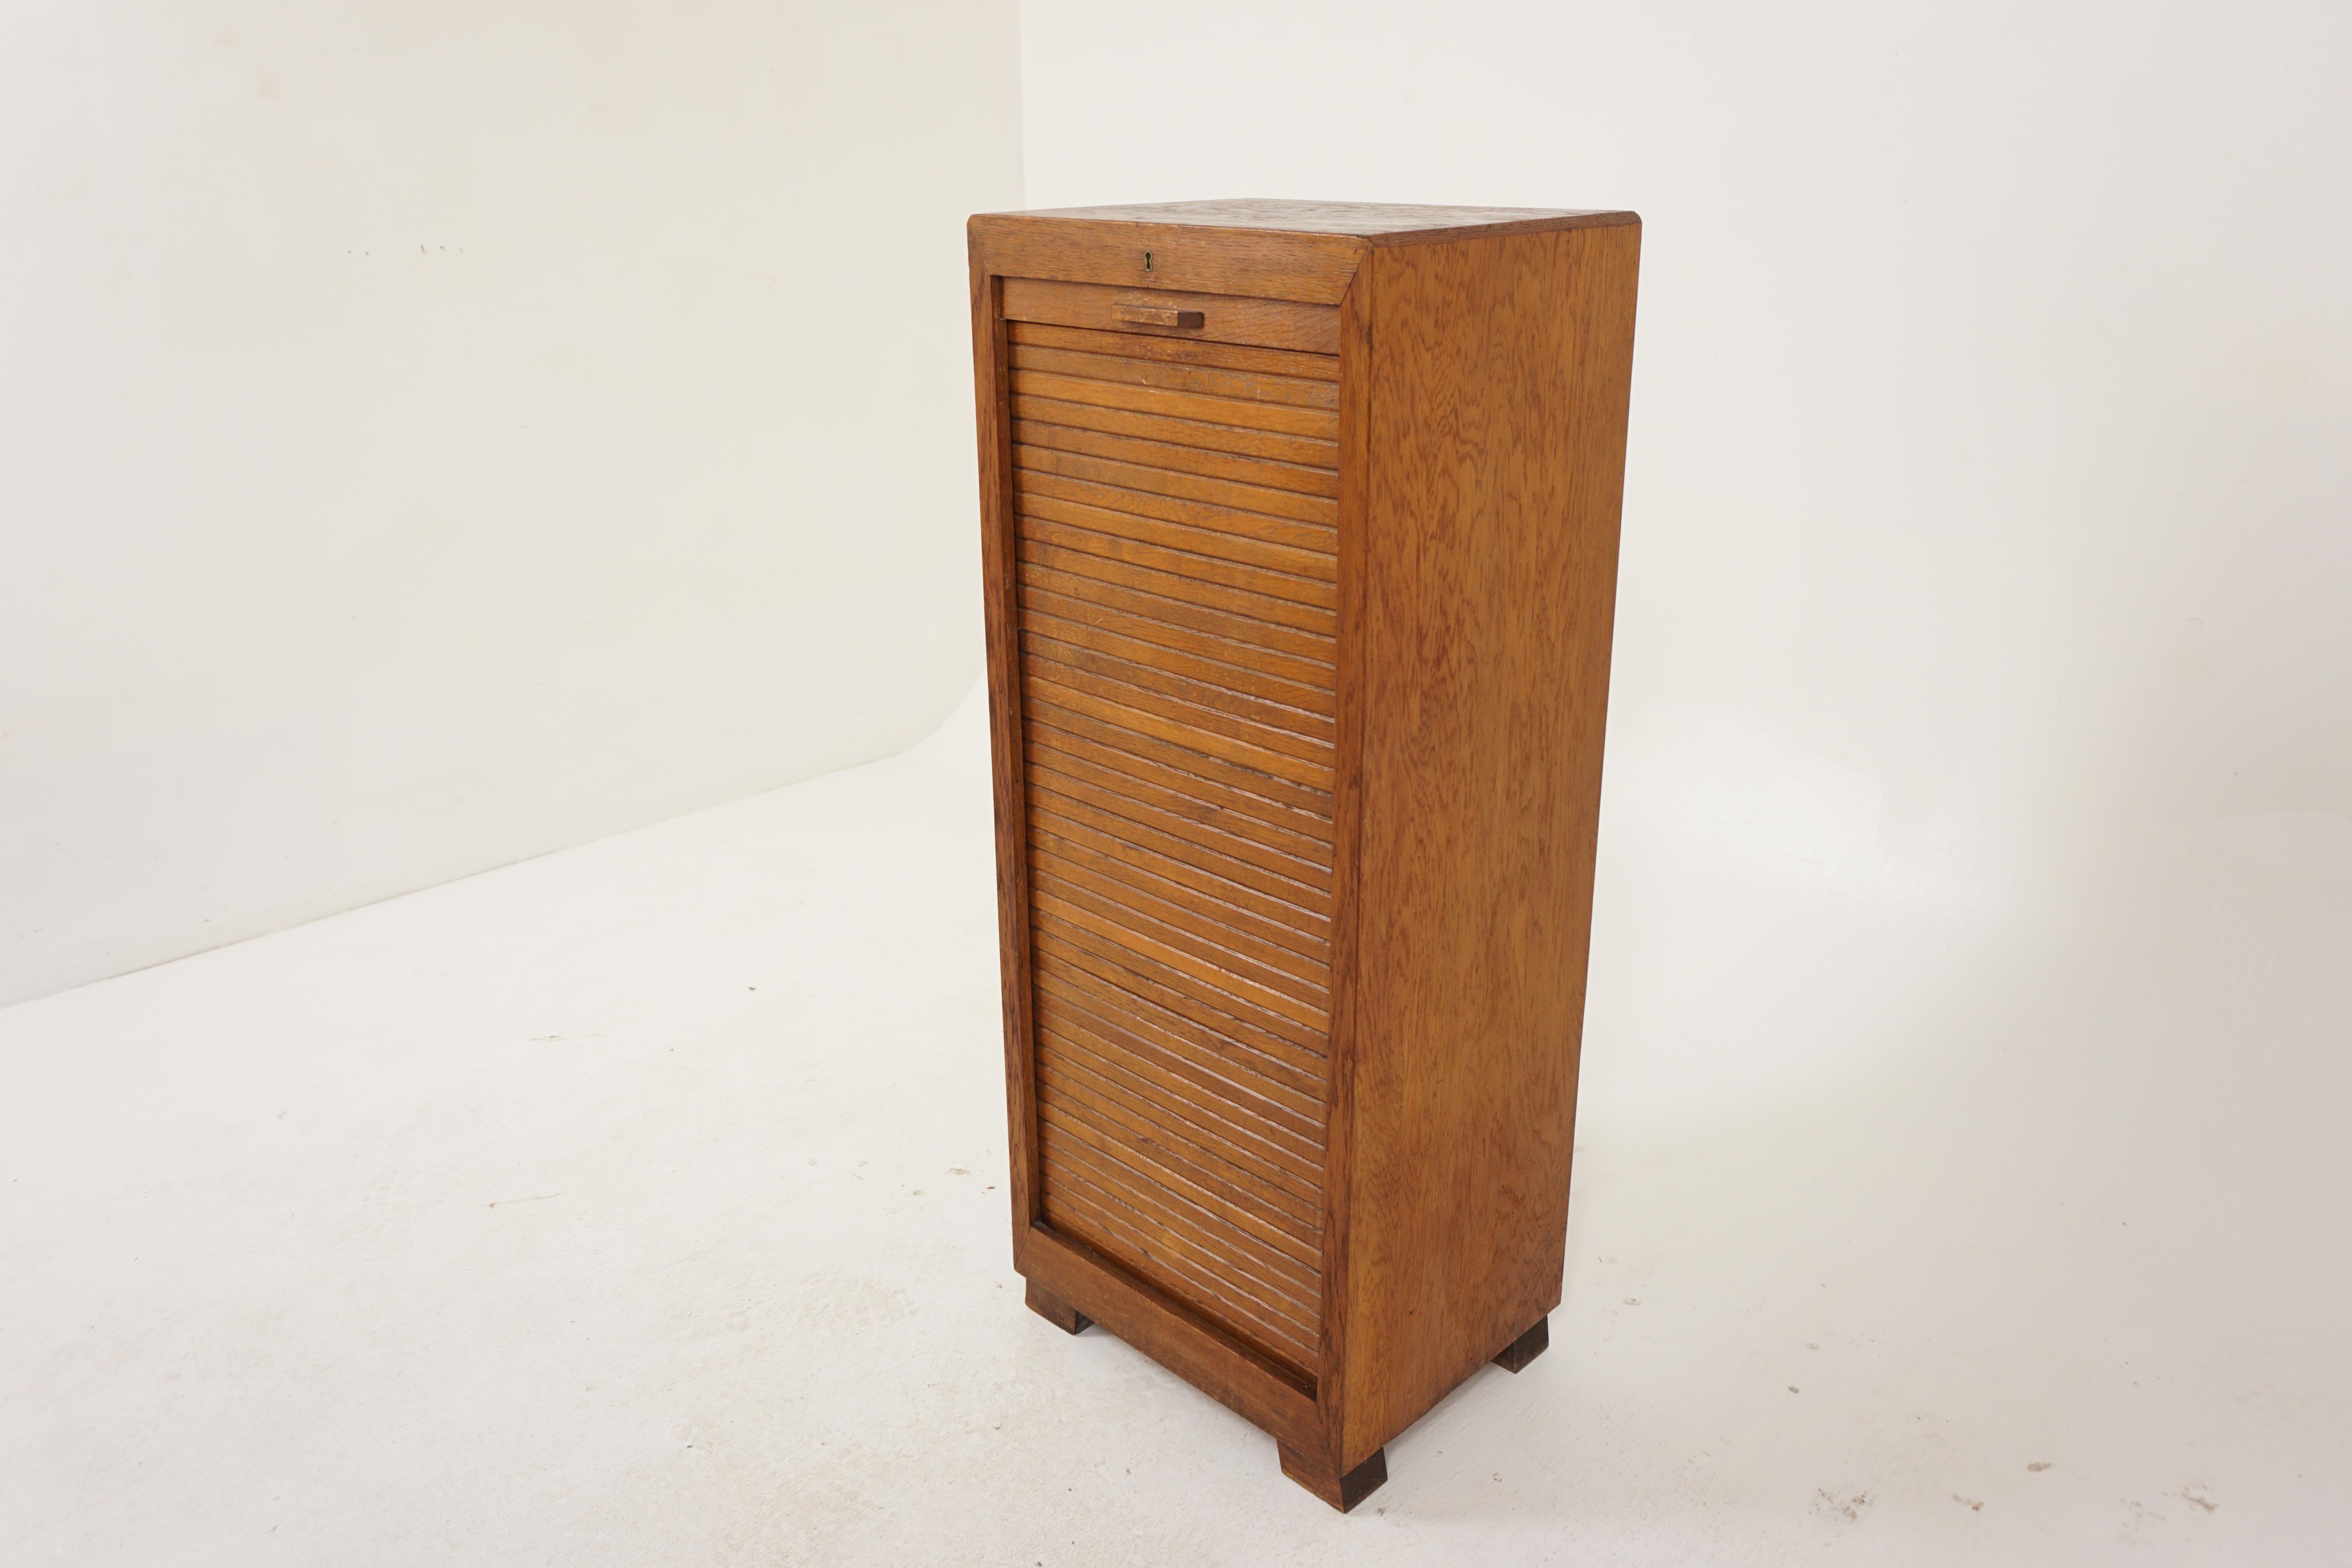 Oak shutter front tambour file cabinet, Sheet Music cabinet, Scotland 1930, B2950

Scotland 1930
Solid Oak + Veener
Original finish
Rectangular Top
Shutter front roll down and roll up
Opens to reveal seven slide out trays
All standing on